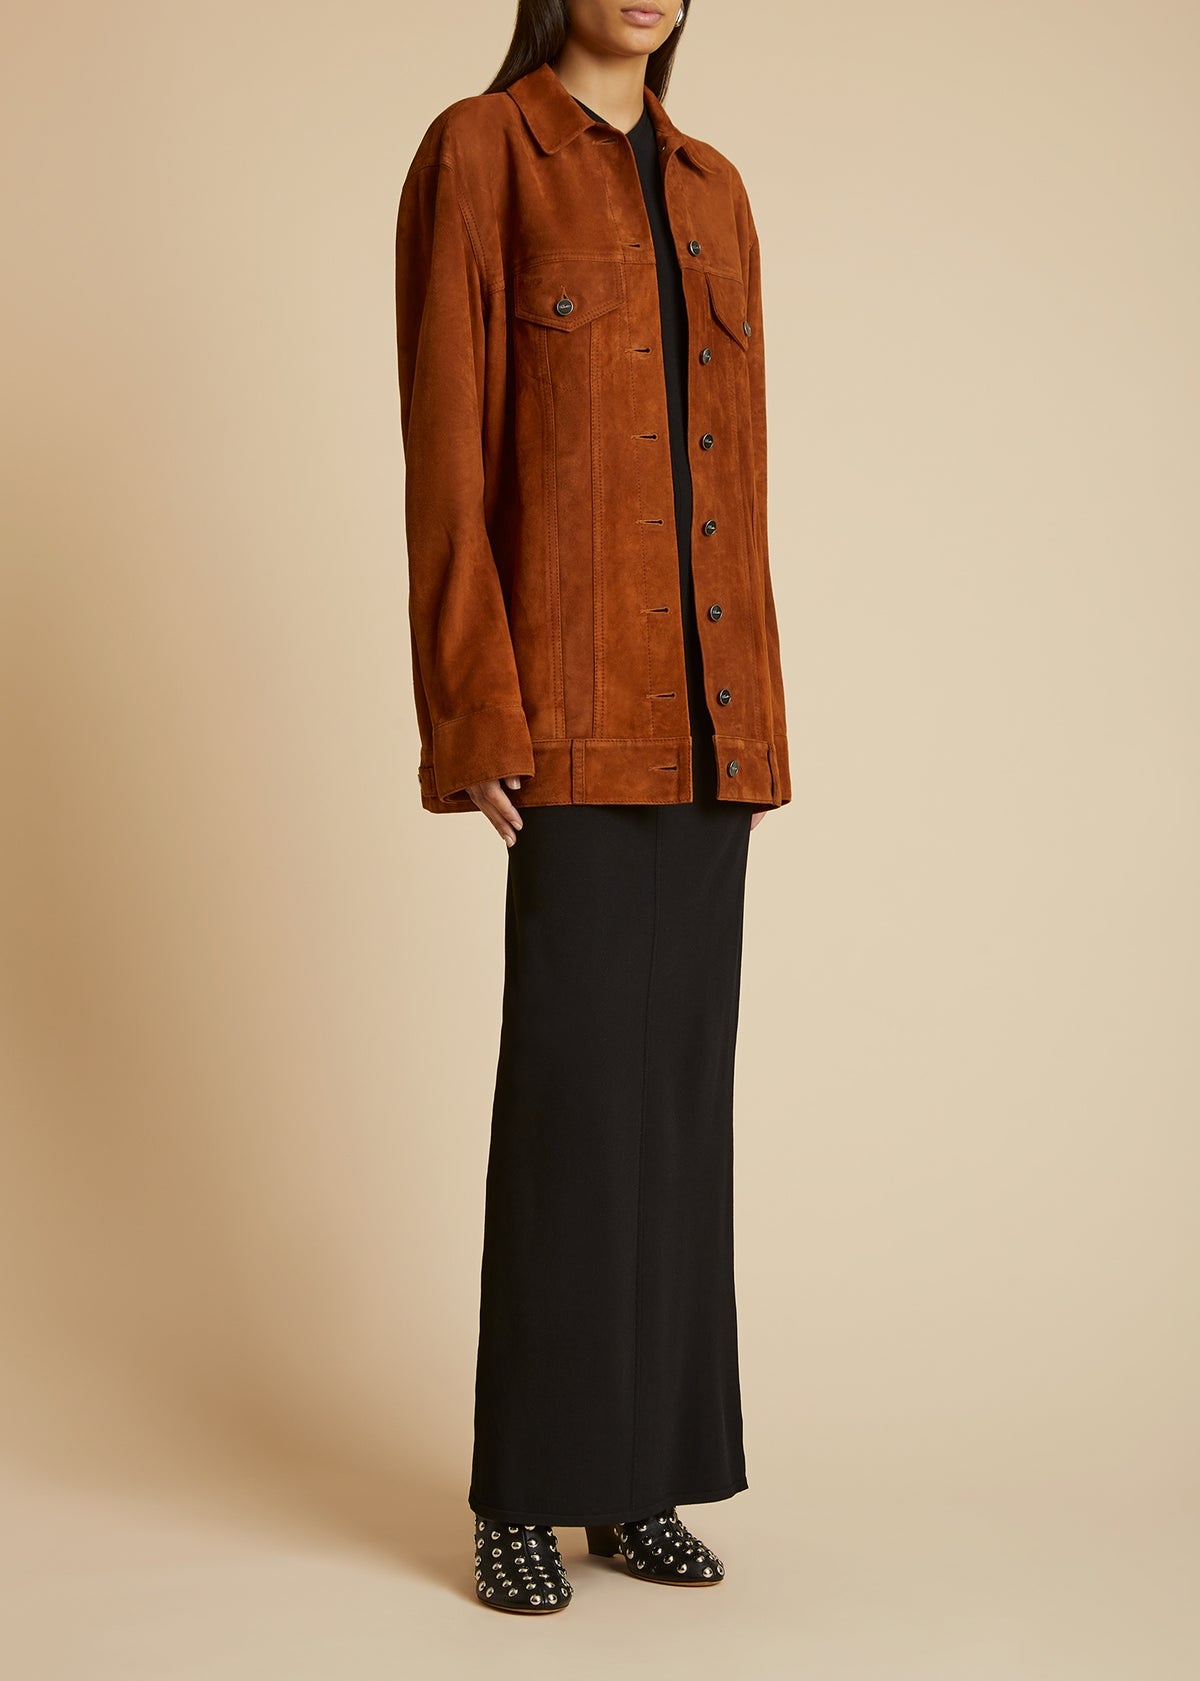 The Ross Jacket in Rust Suede - 1